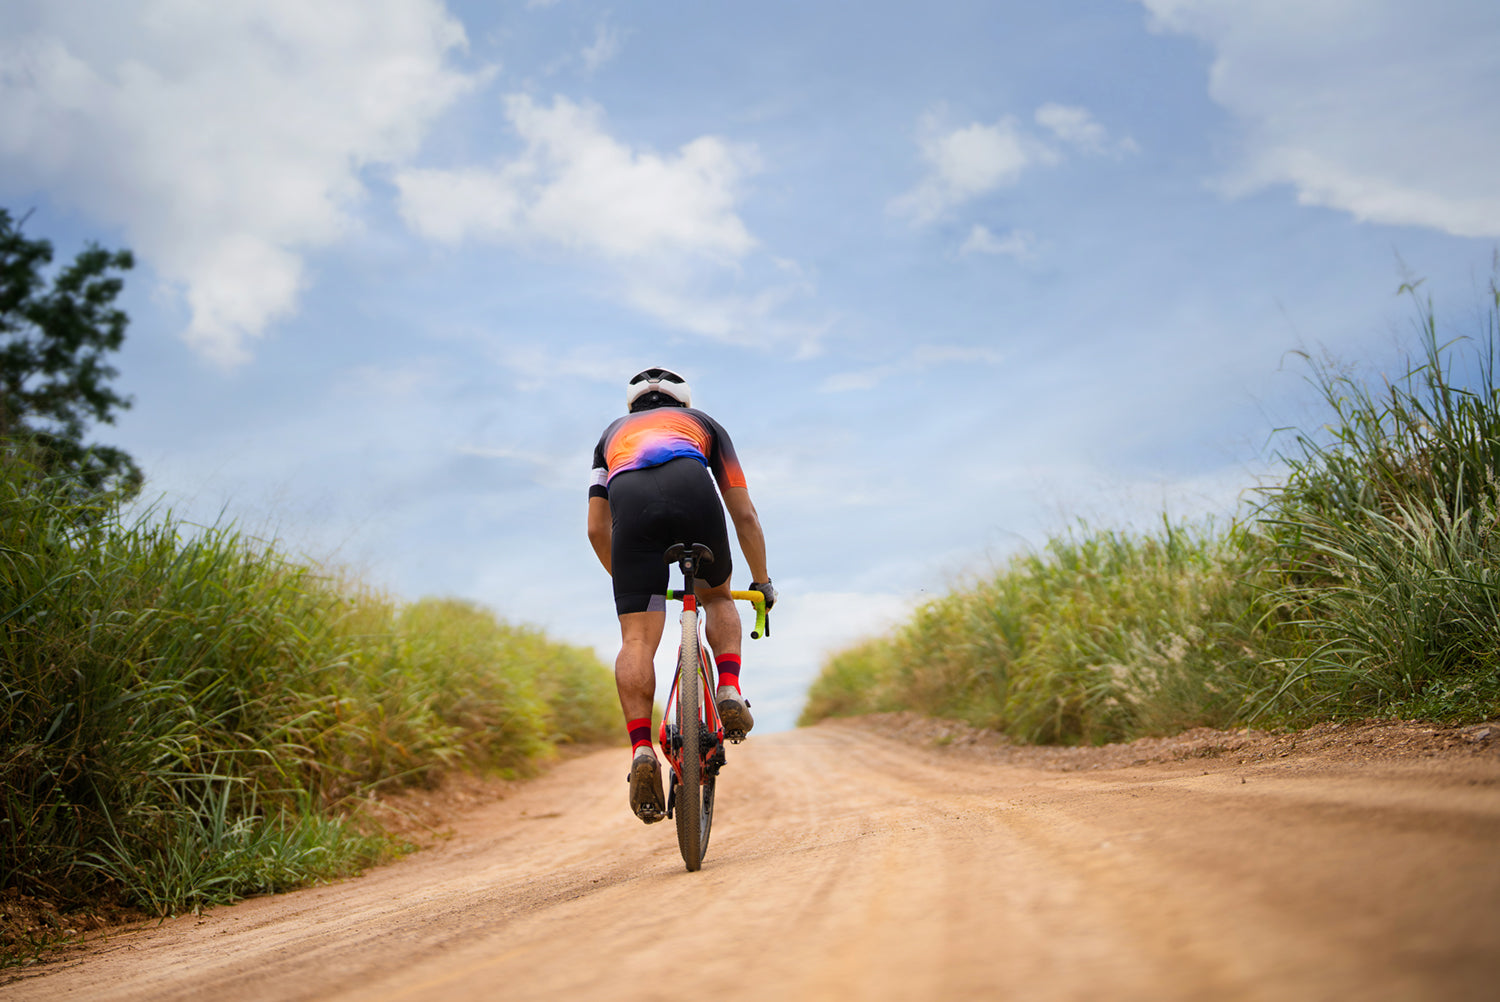 Tubeless vs Tubed And How To Choose The Best Tires For Gravel Riding